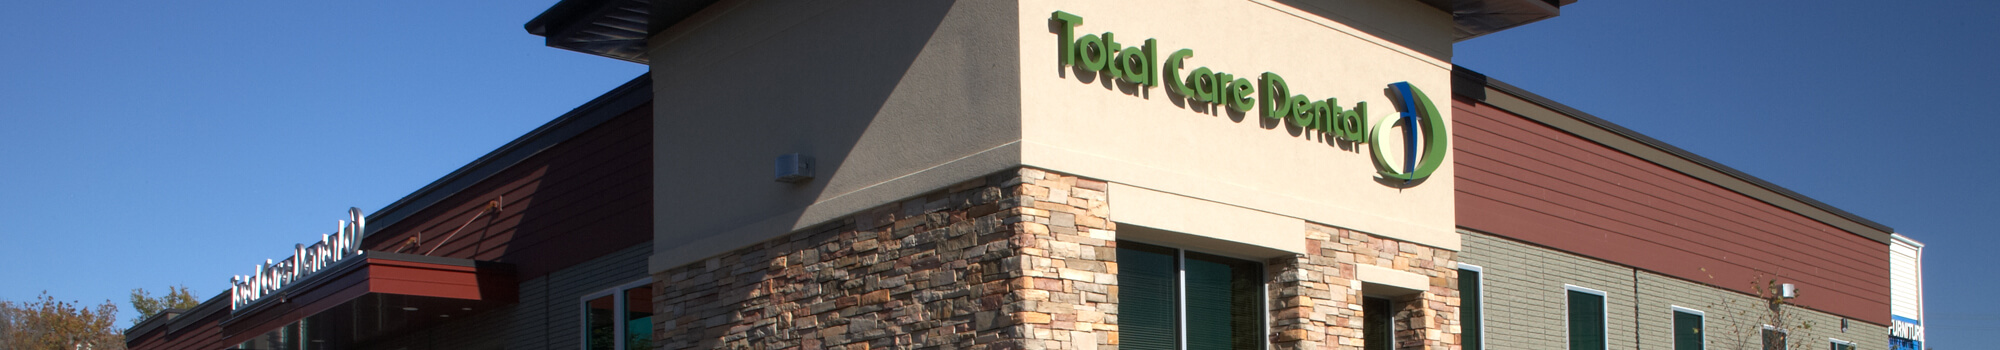 Total Care Dental in Madison, Wisconsin has the answer for your dental concerns